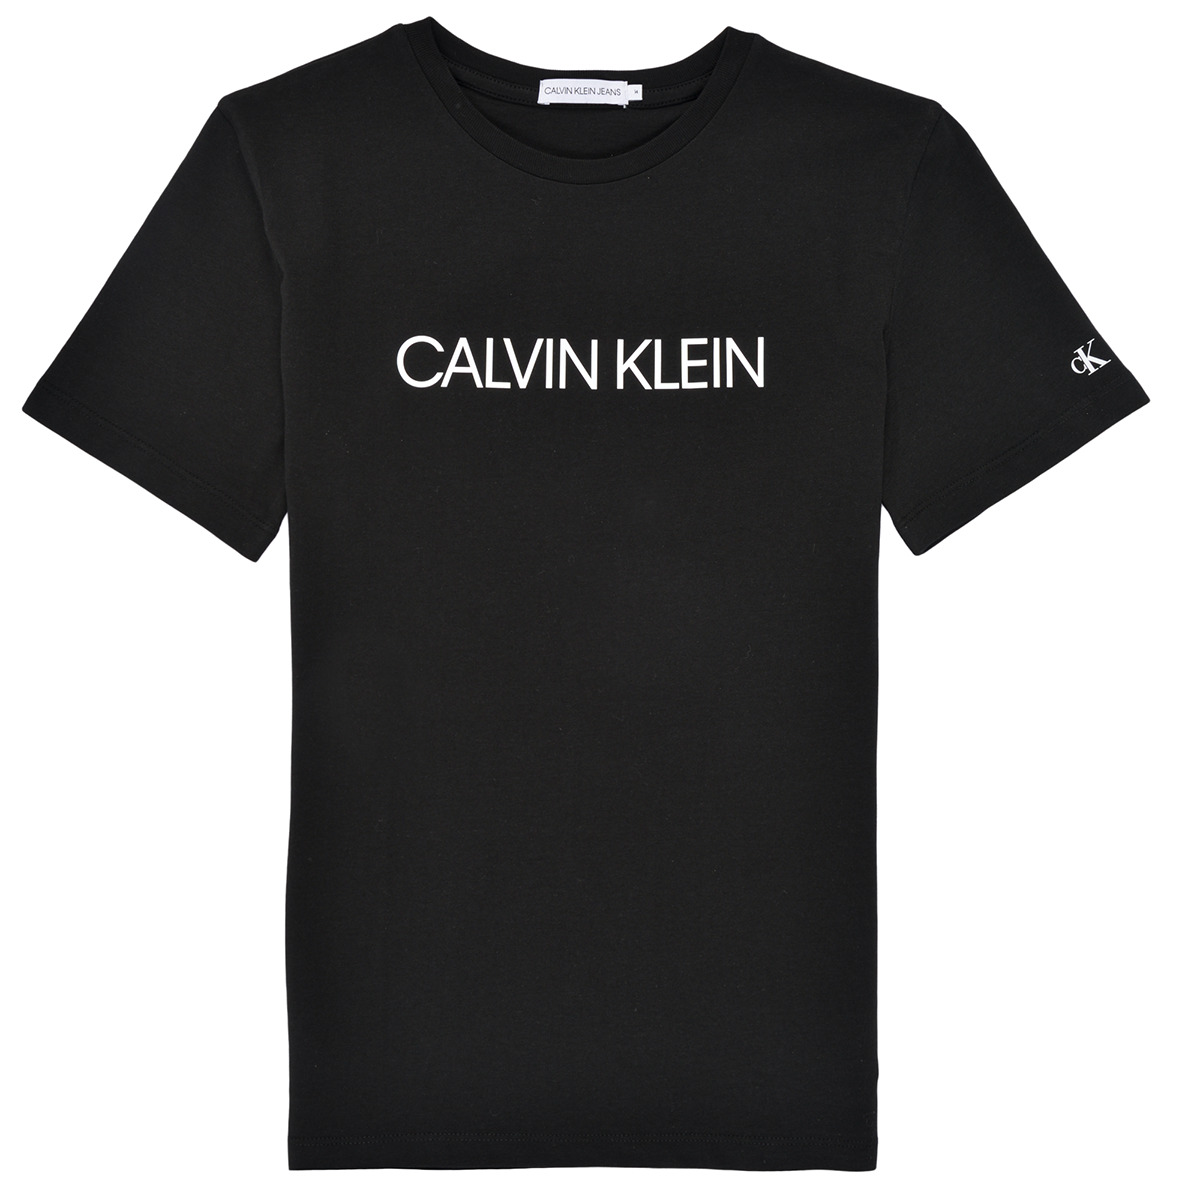 Calvin Klein Jeans INSTITUTIONAL T-SHIRT Black - Fast delivery | Spartoo  Europe ! - Clothing short-sleeved t-shirts Child 33,00 €